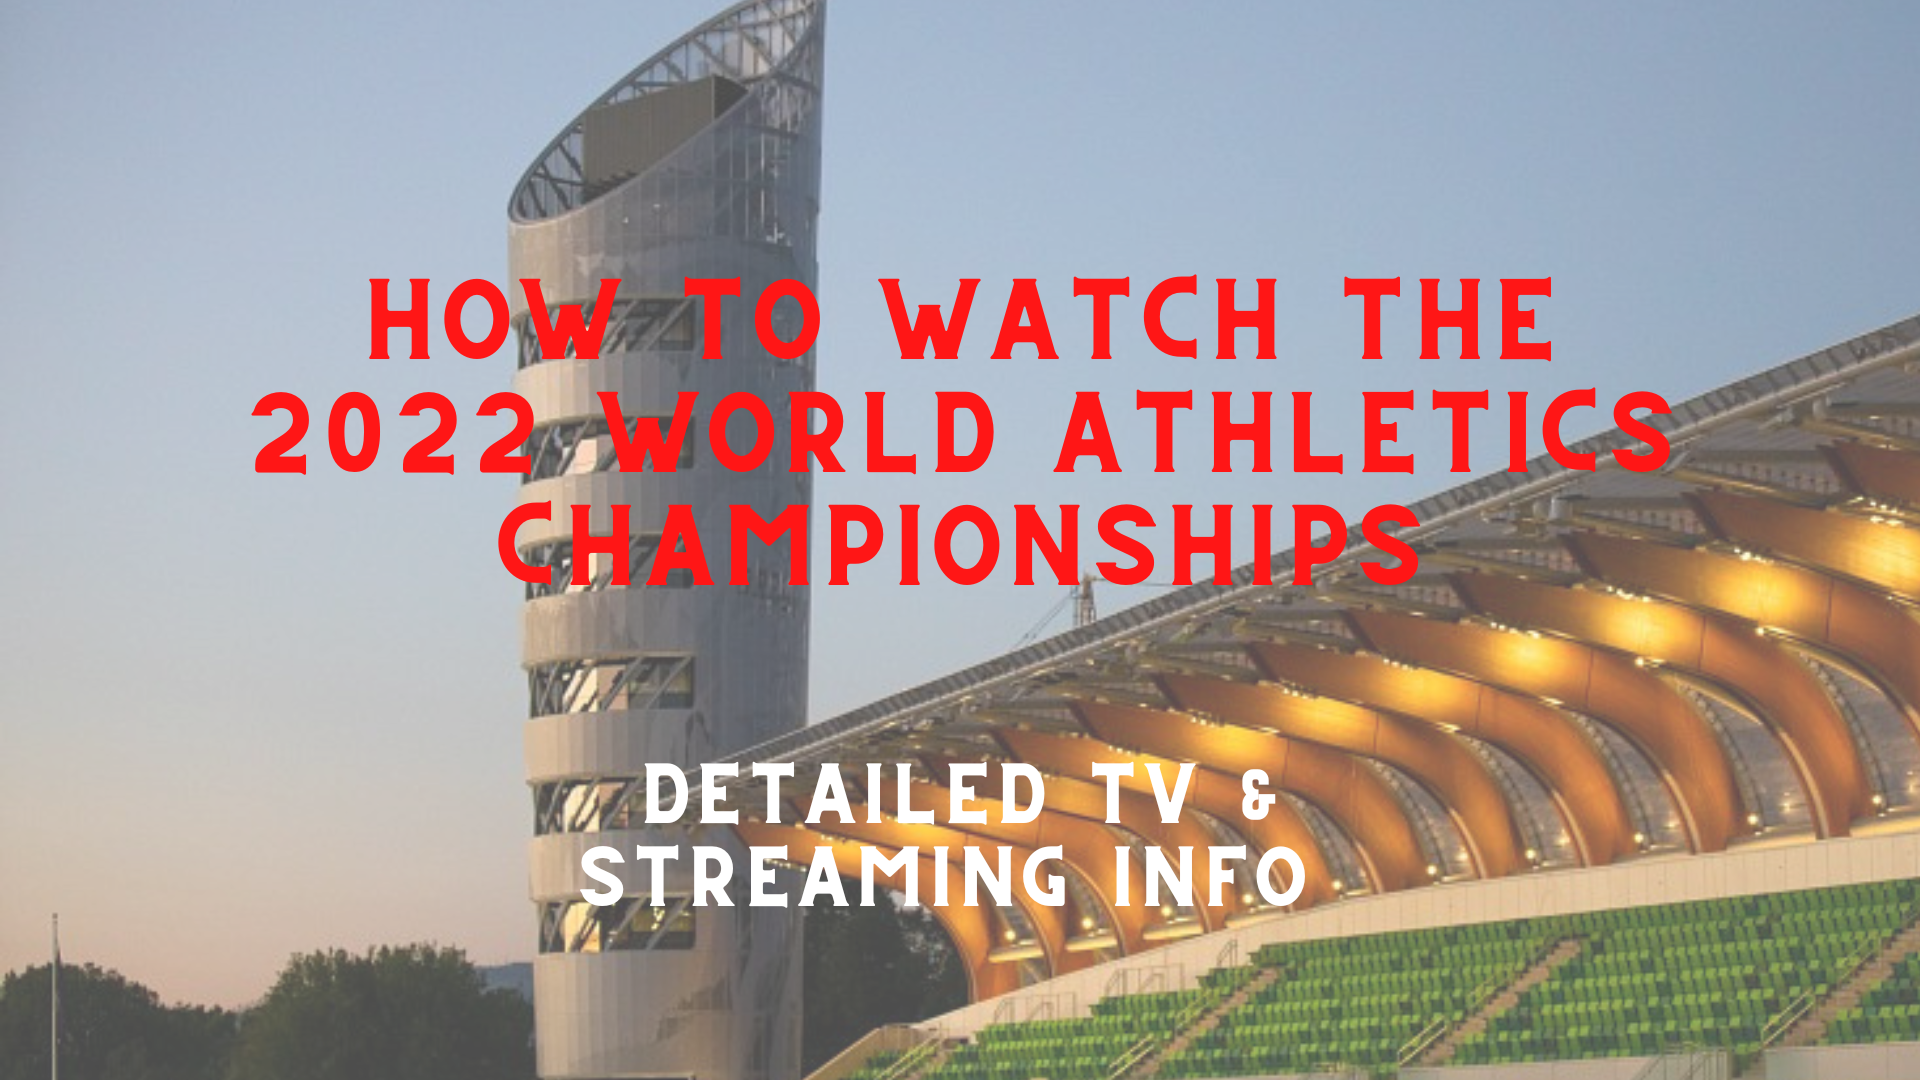 Television and Streaming Information for 2022 World Athletics